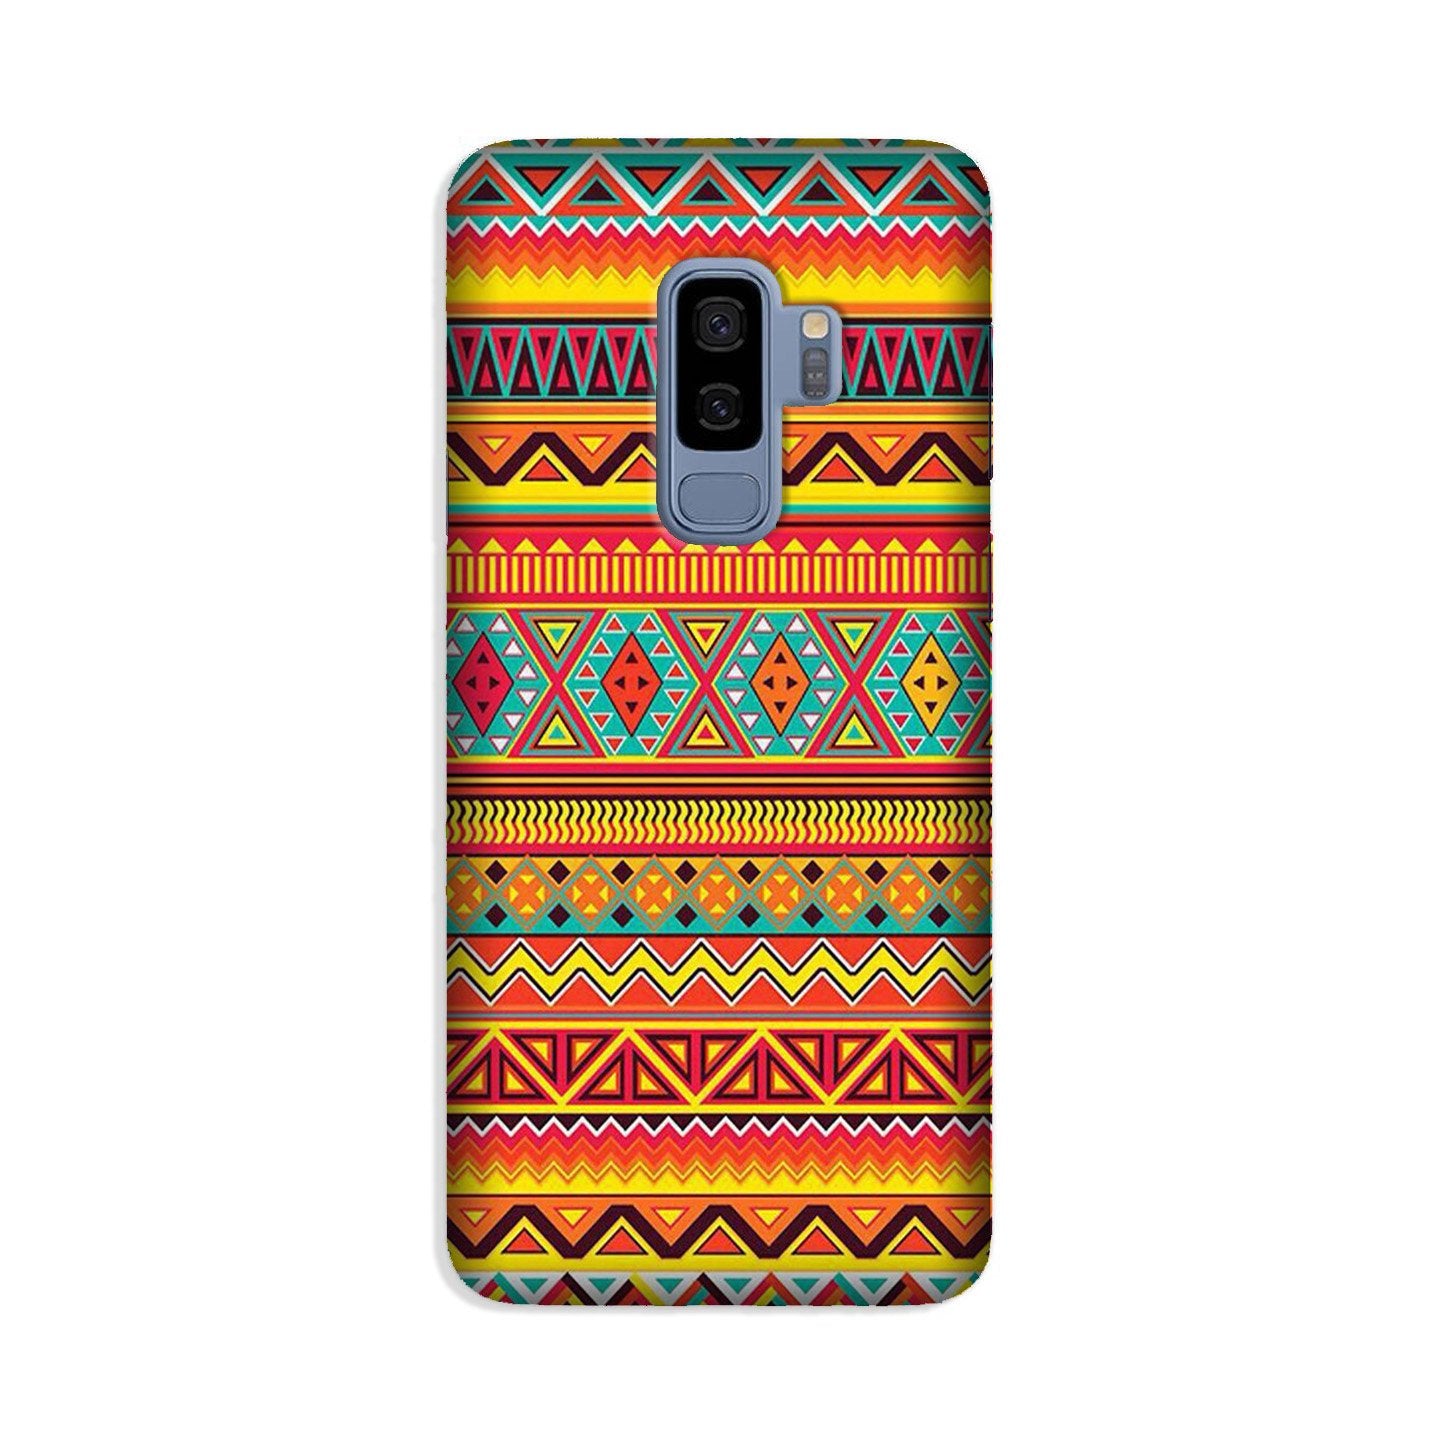 Zigzag line pattern Case for Galaxy S9 Plus